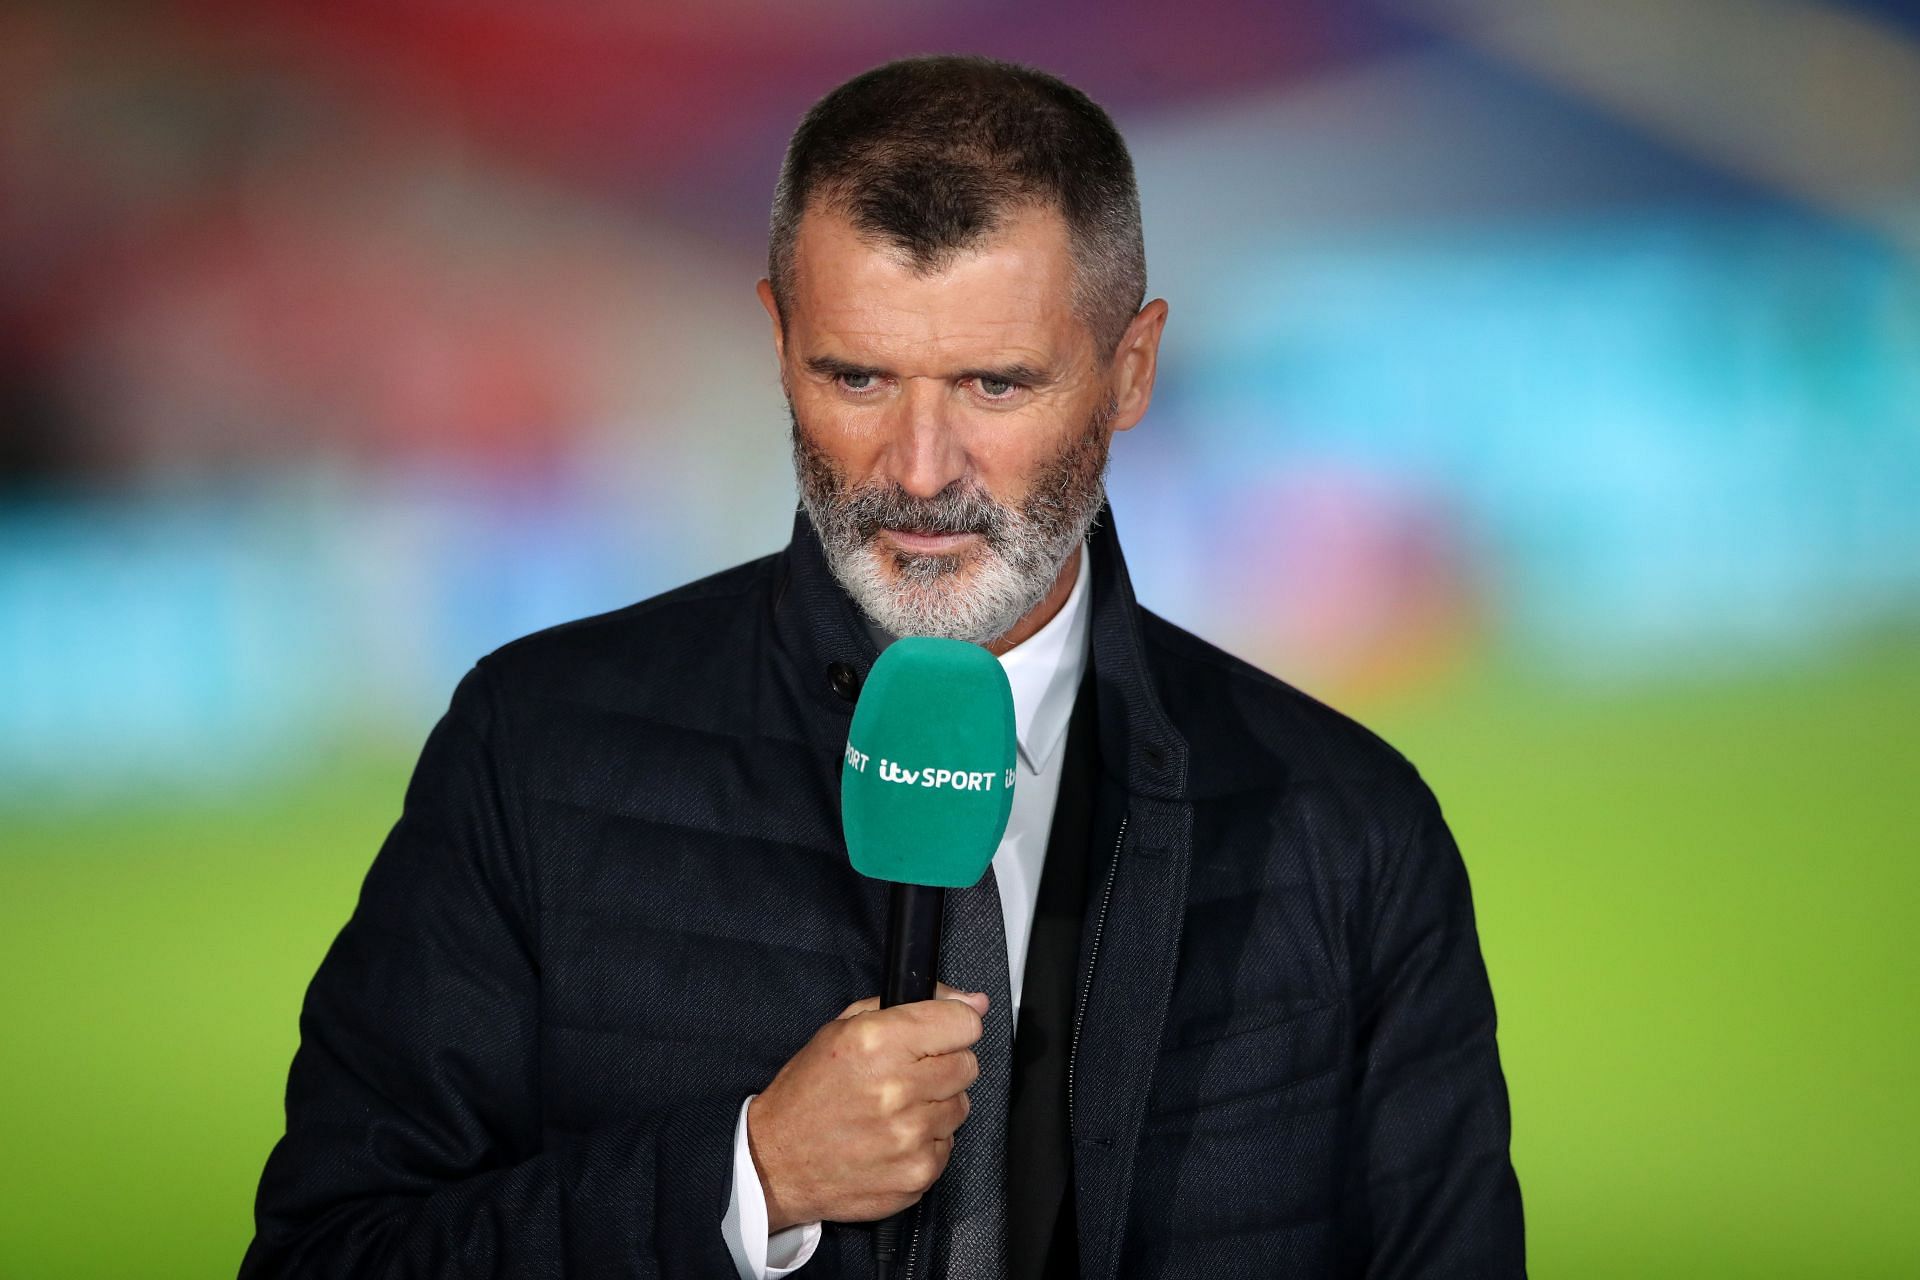 “He’s cheating” – Roy Keane slams Leeds United star for what he did against Manchester United